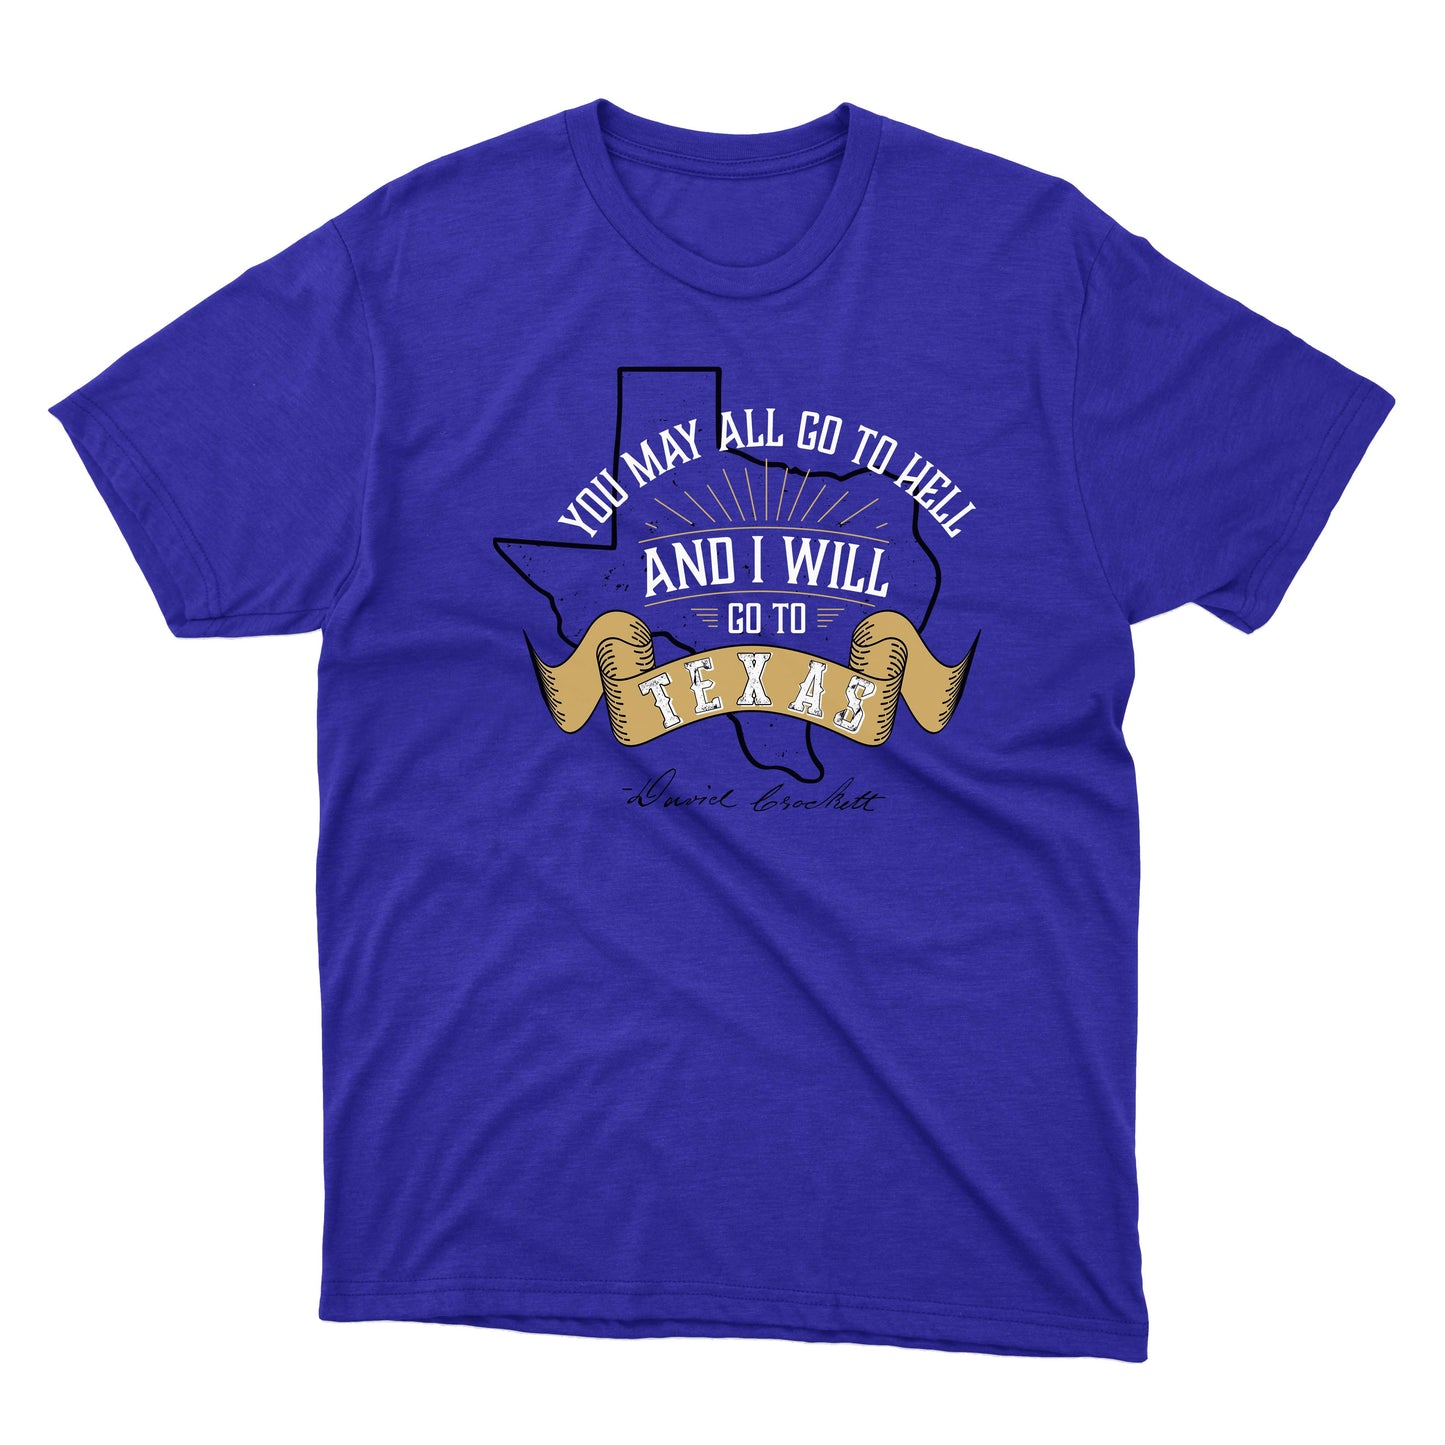 You May All Go To Hell and I Will Go To Texas Shirt